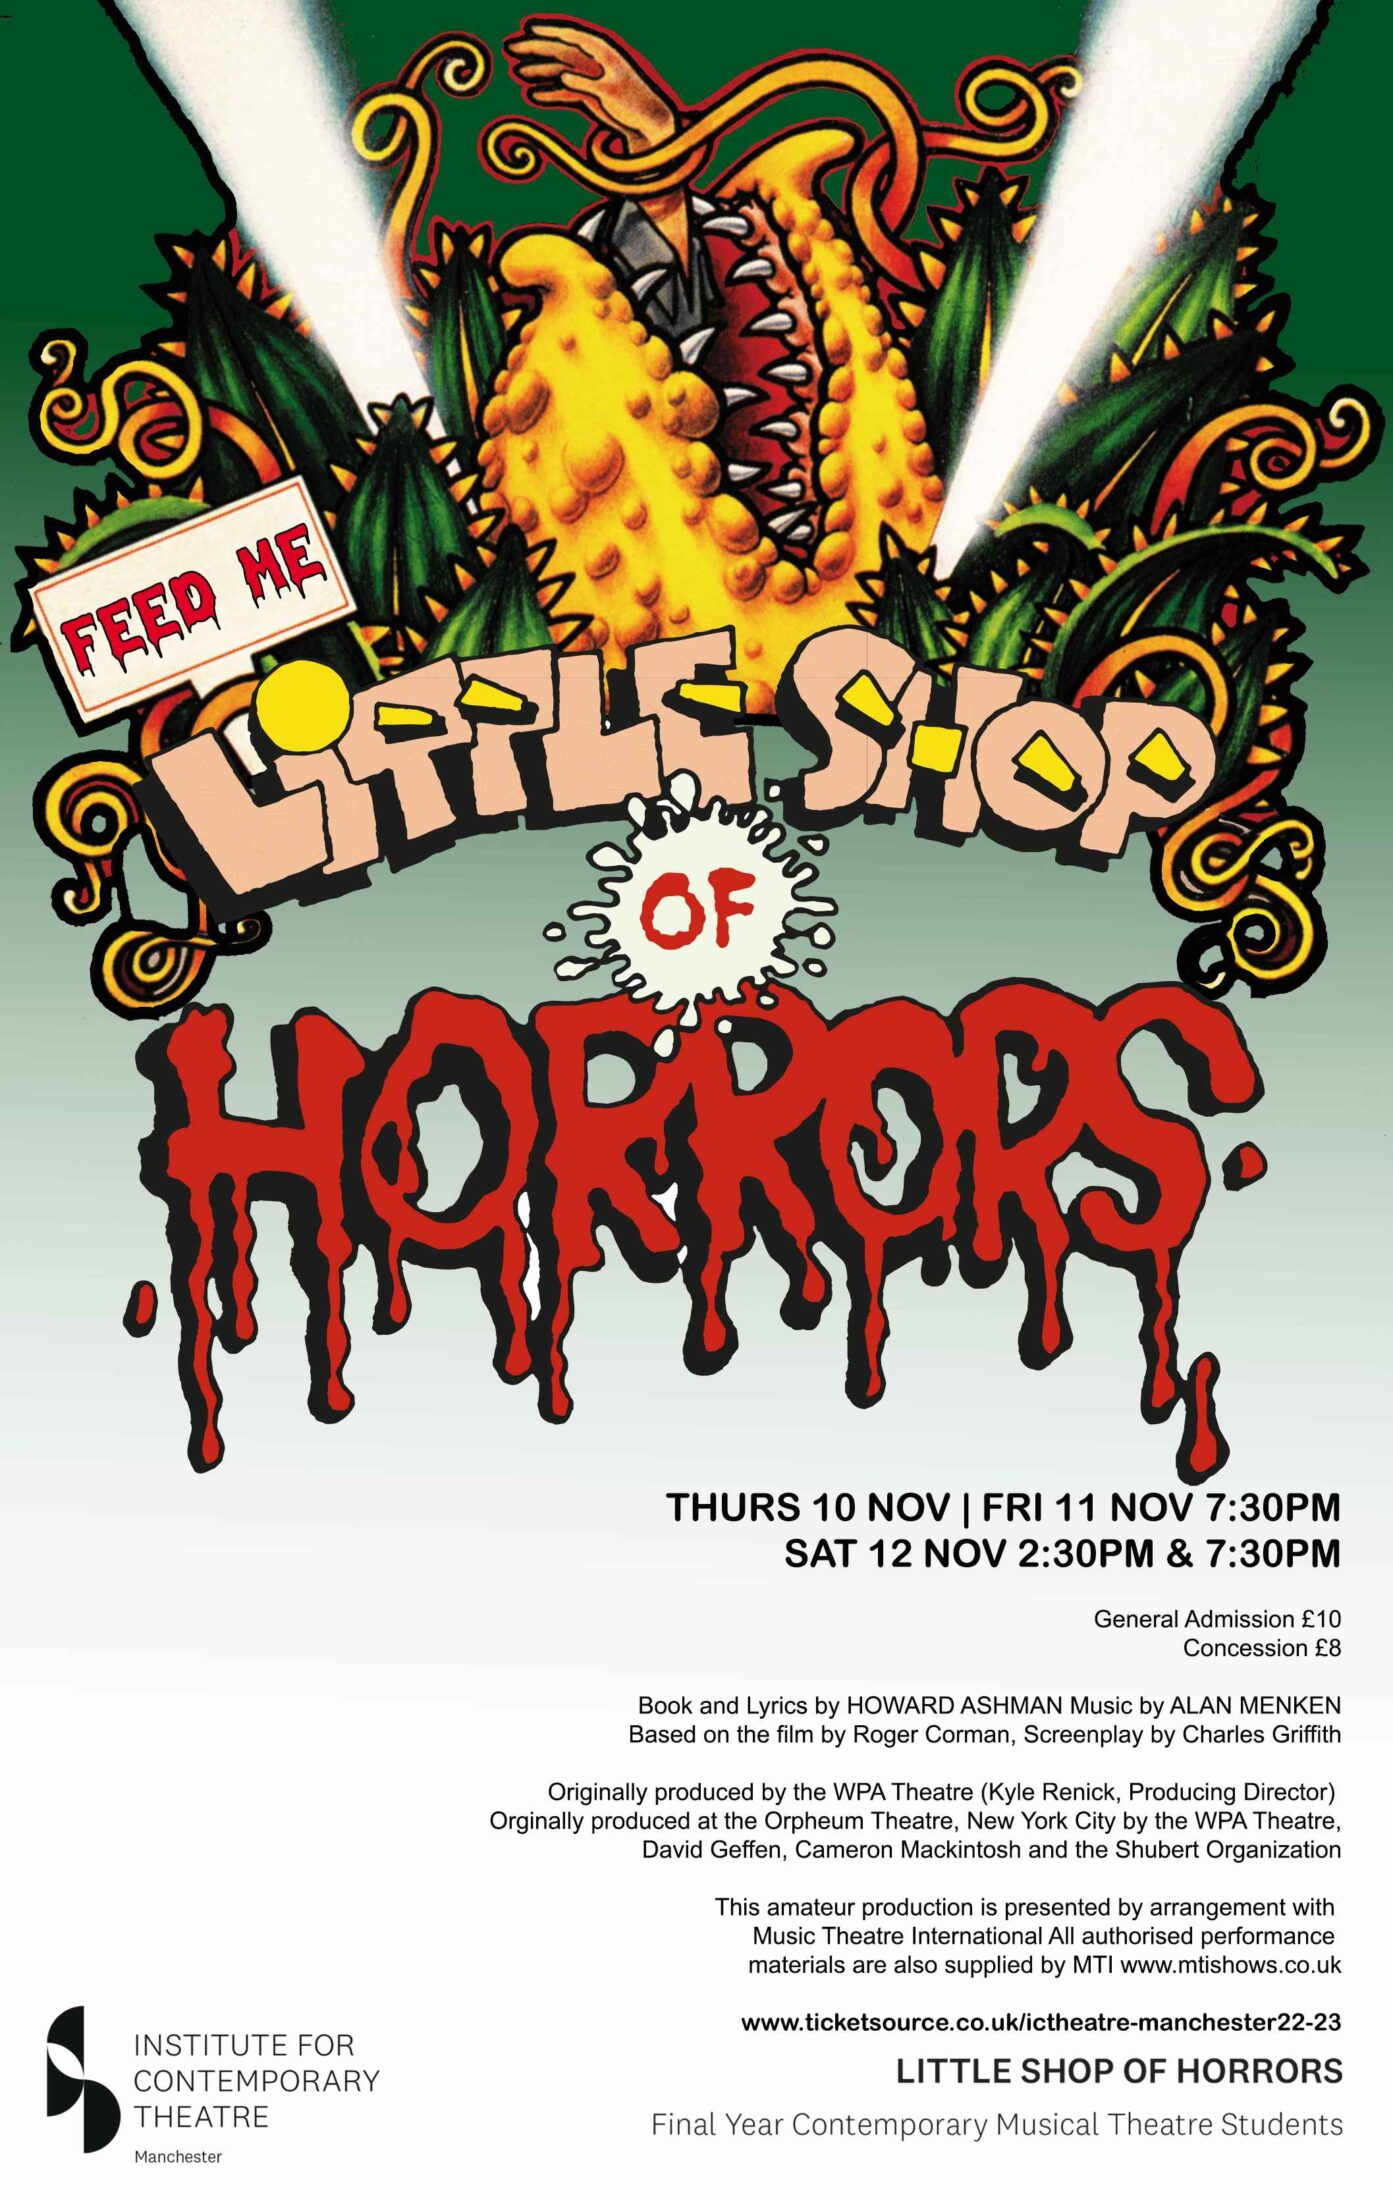 Little Stop Of Horrors (10 Nov - 11 Nov) Poster - The Institute for Contemporary Theatre